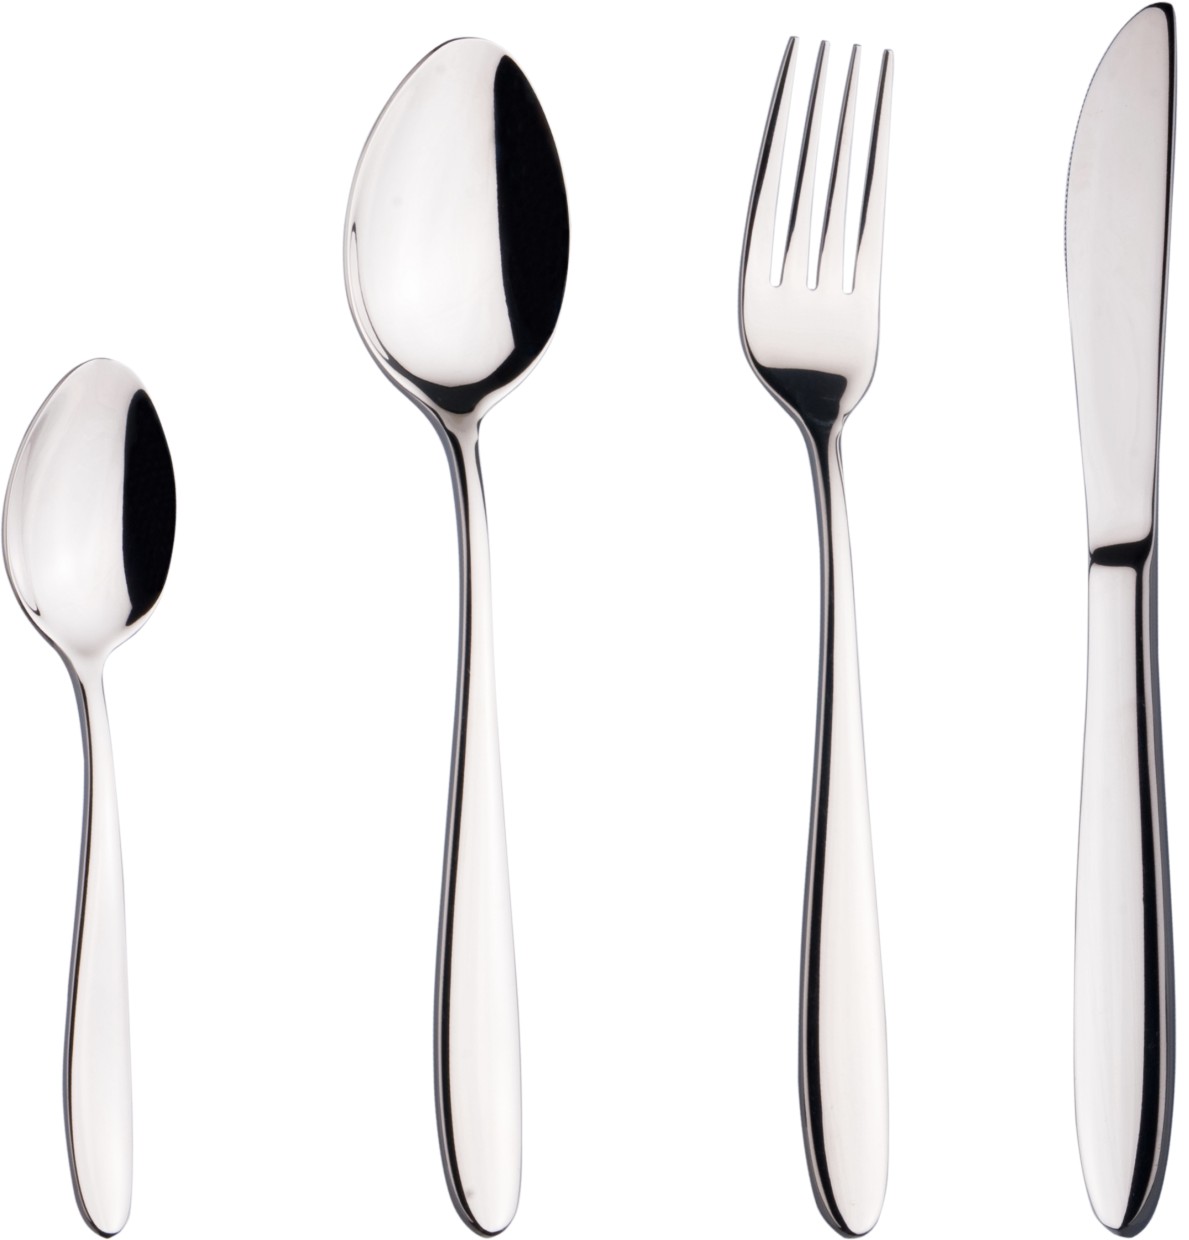 Spoon & Fork Png - ClipArt Best